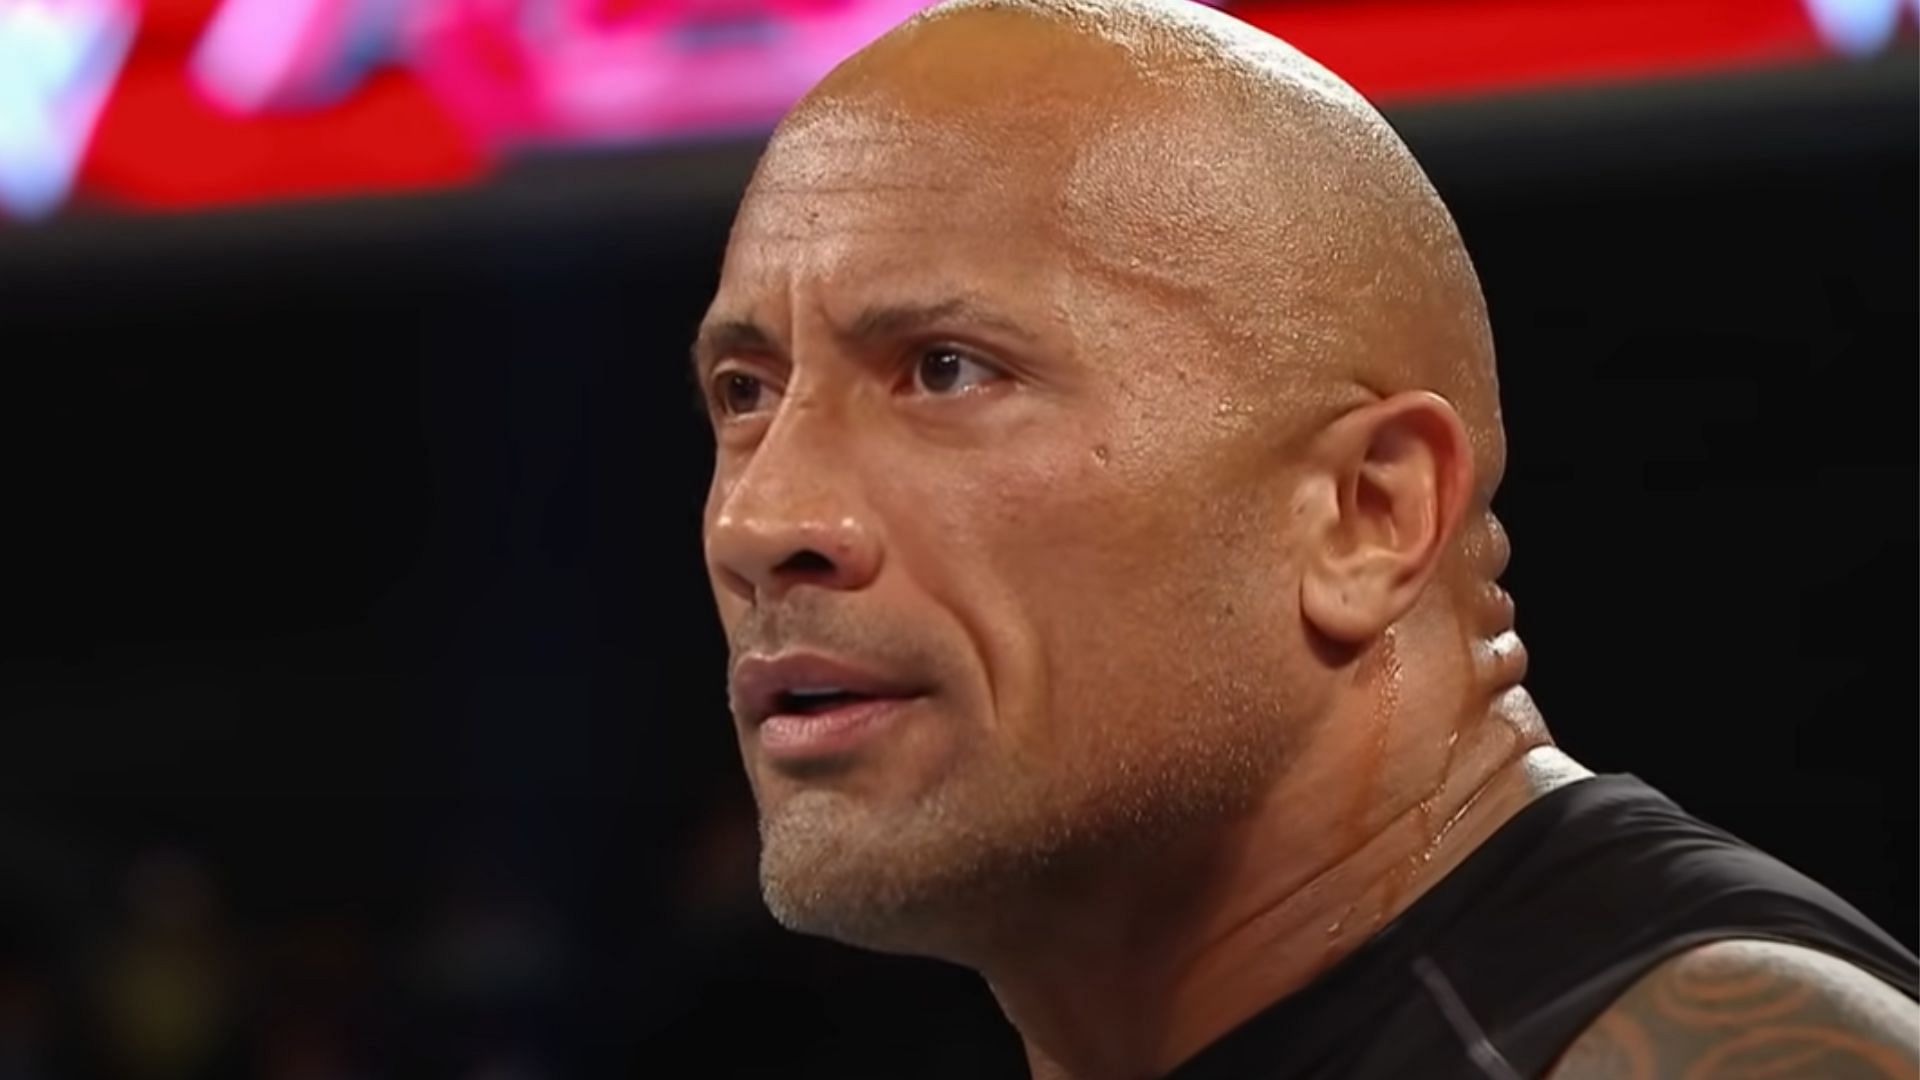 WWE nixed idea for AEW star to beat The Rock, former writer says ...